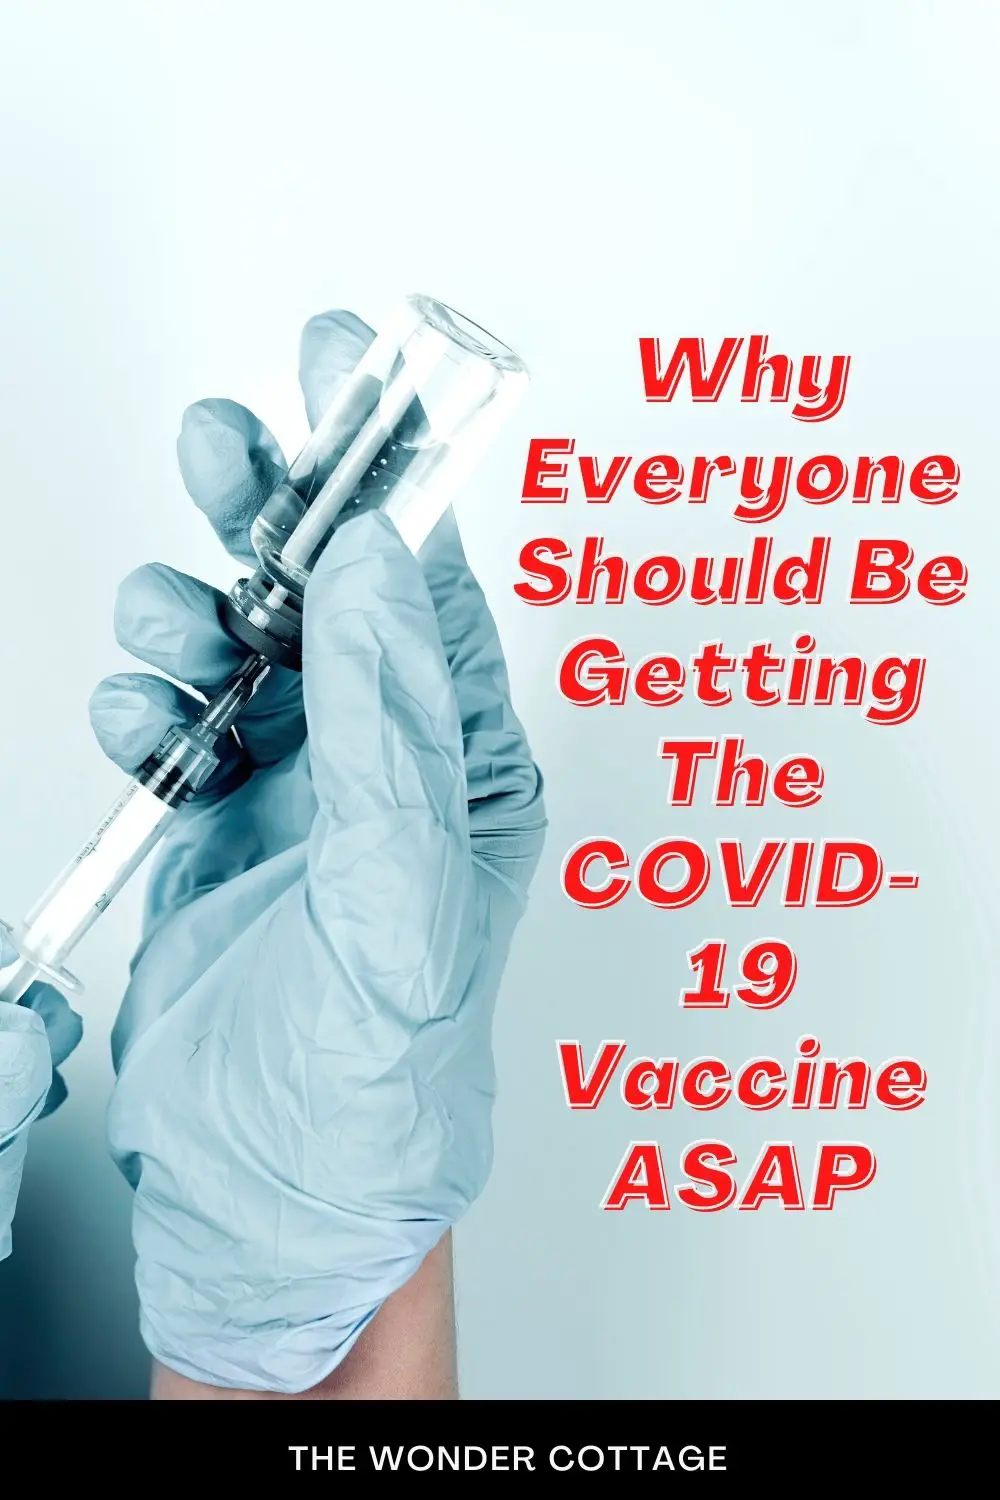 Why Everyone Should Be Getting The COVID-19 Vaccine As Soon As Possible